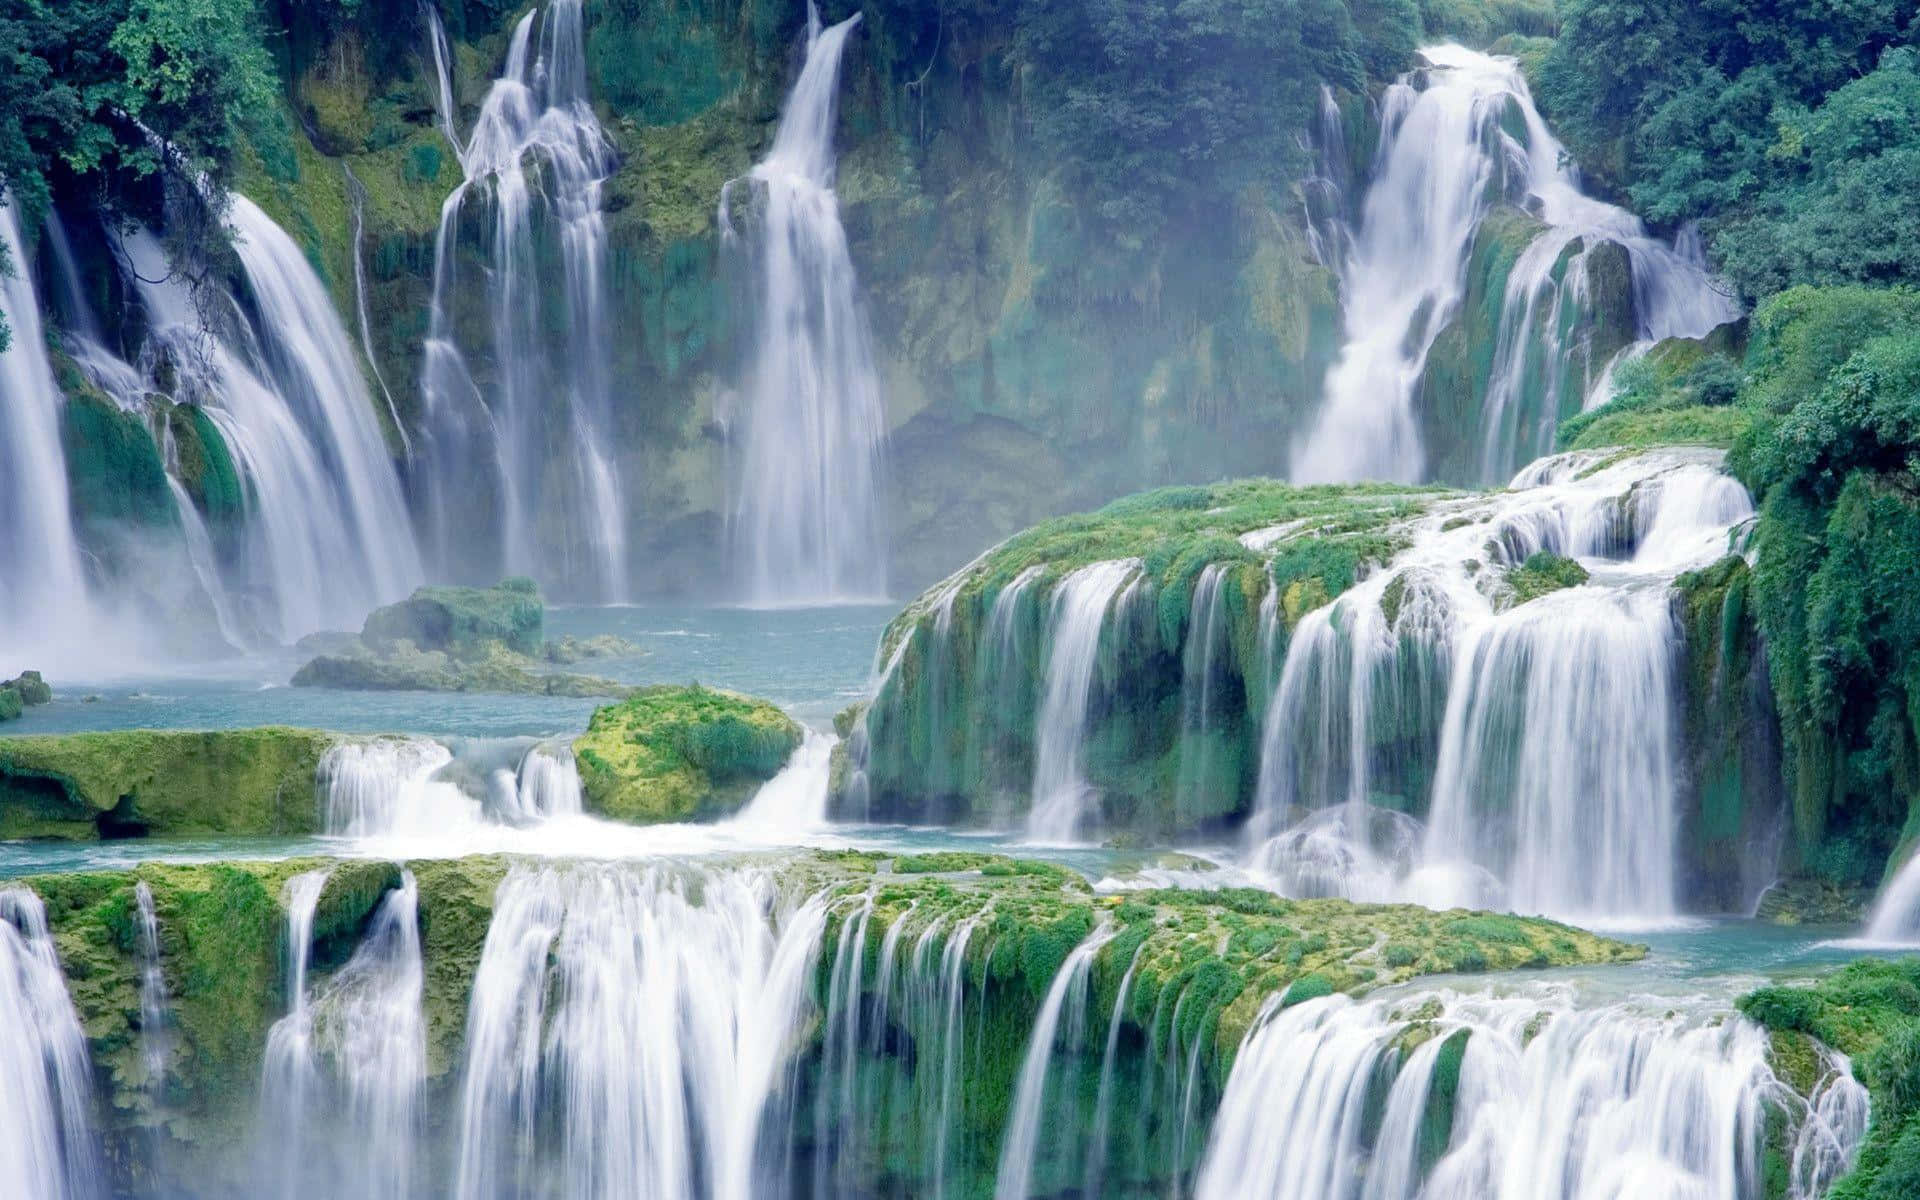 Nature's majesty - a stunning view of a cascading waterfall